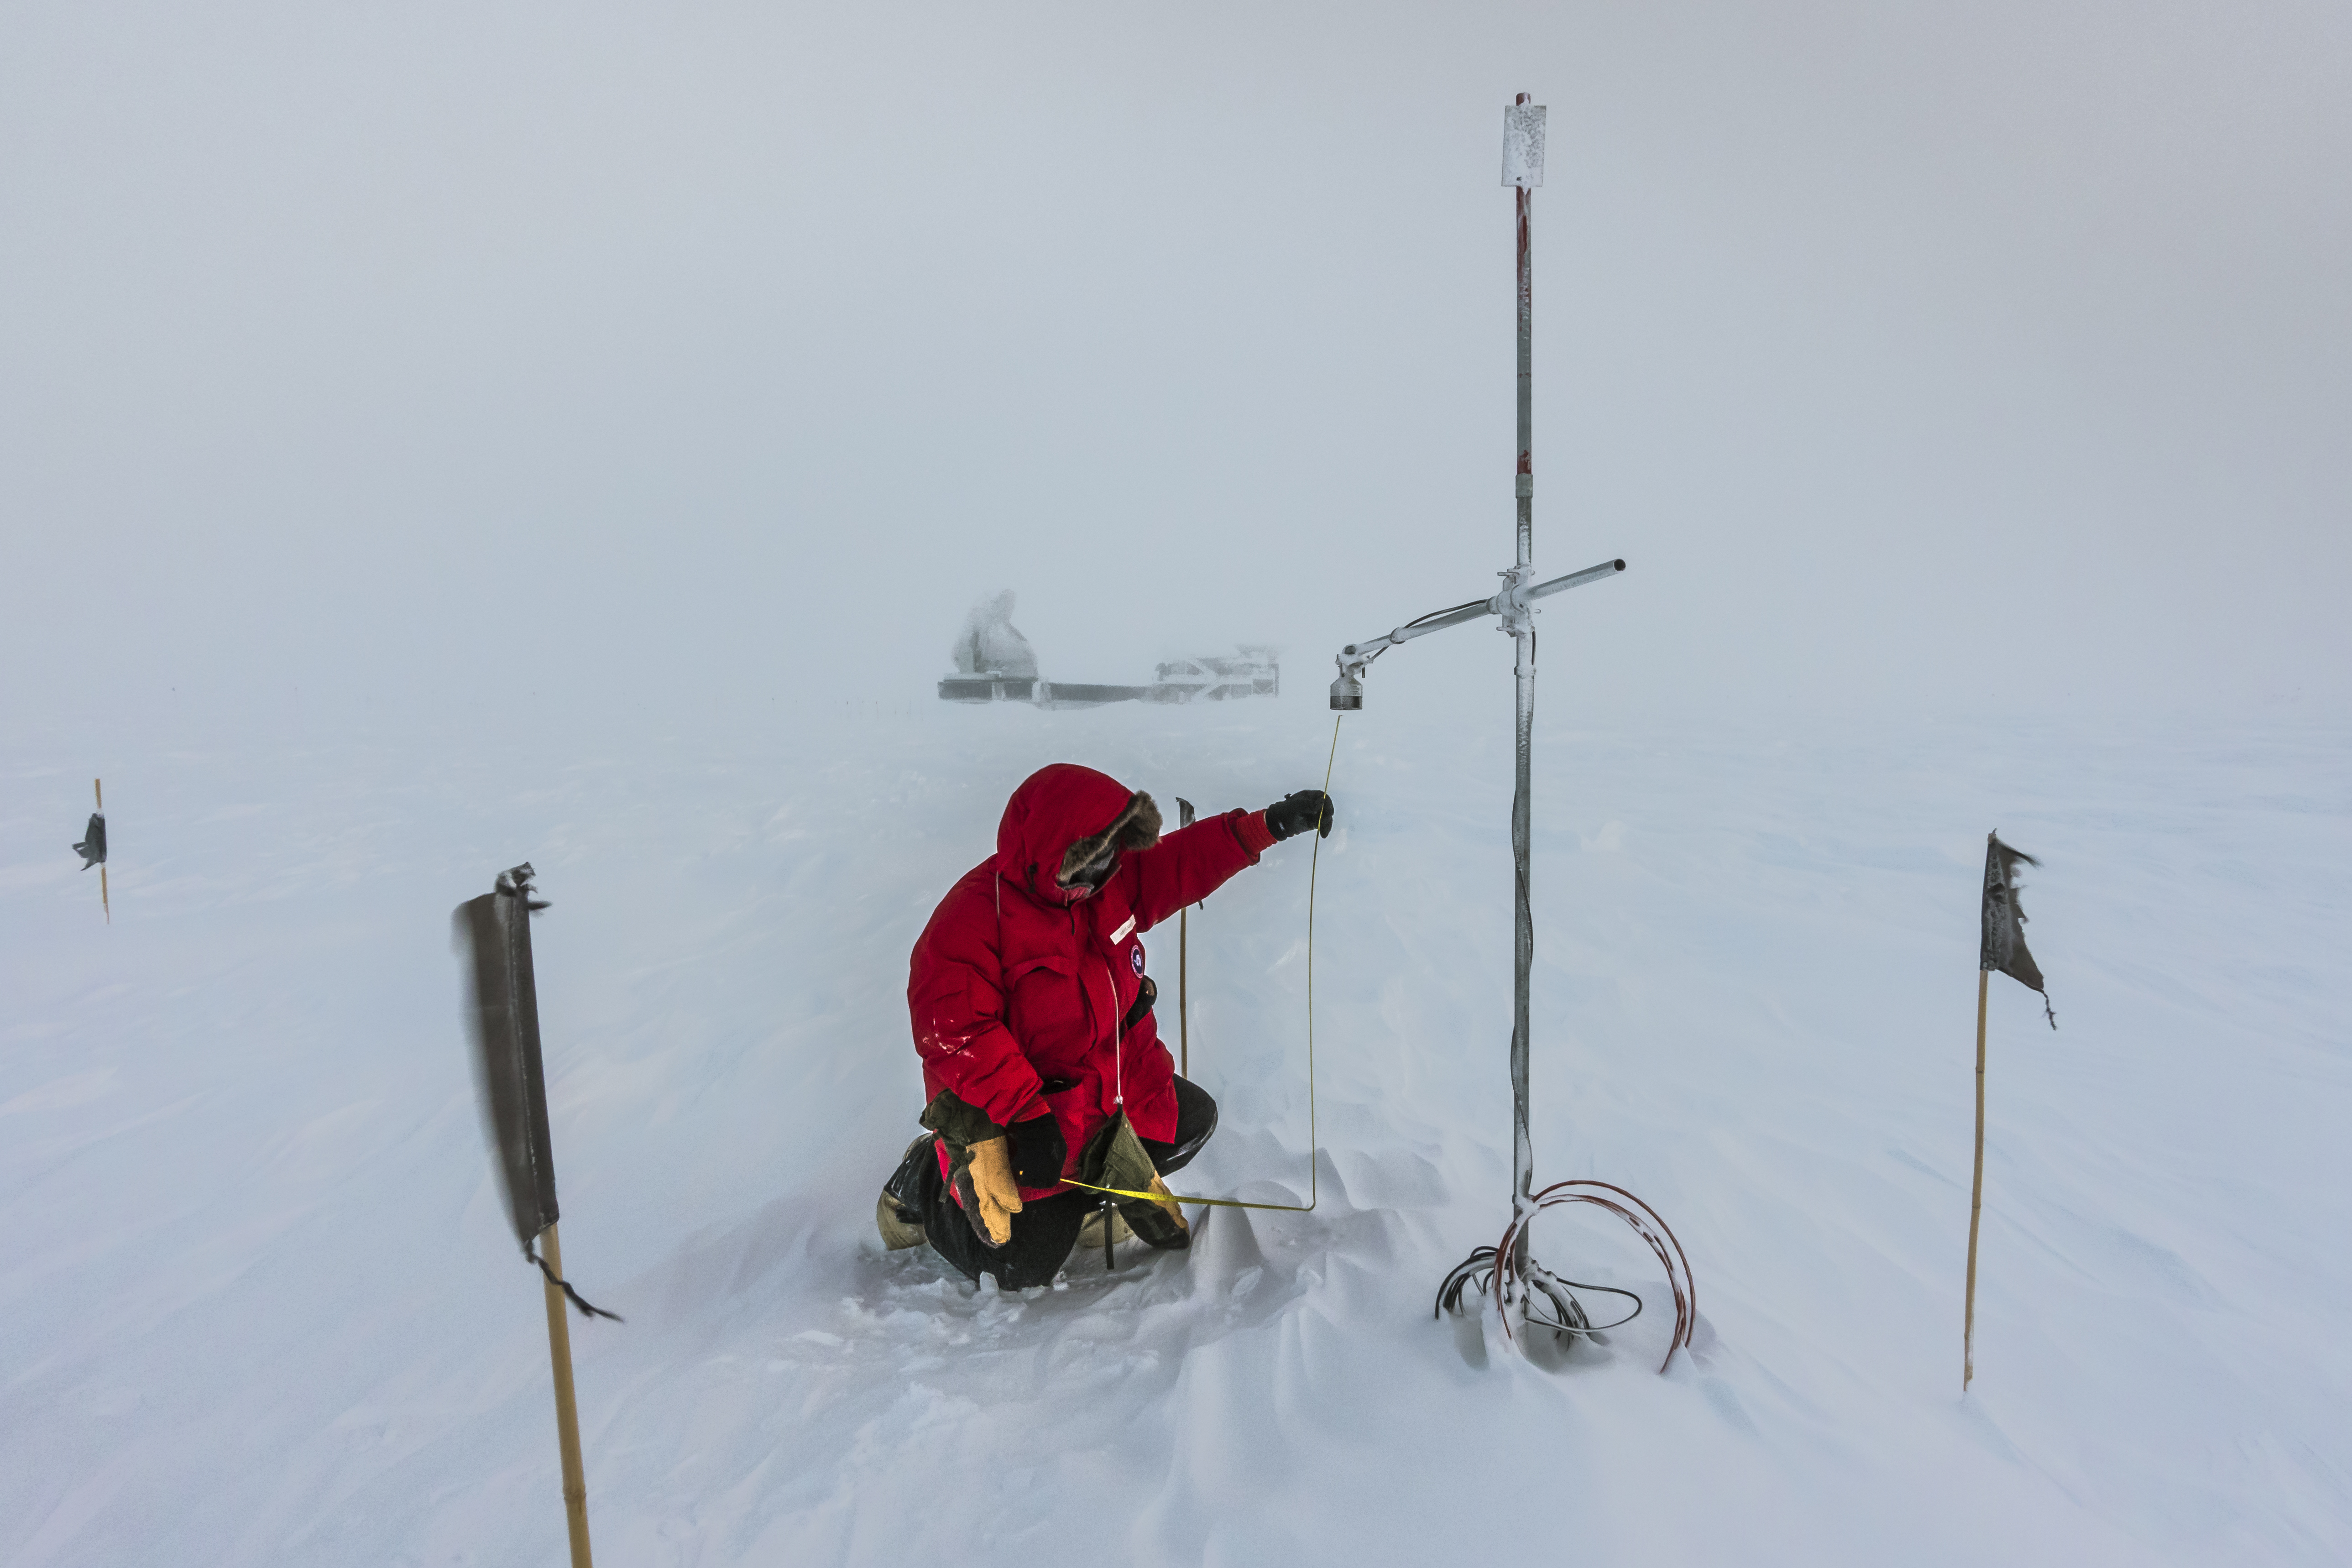 Taking snow measurements at the South Pole.